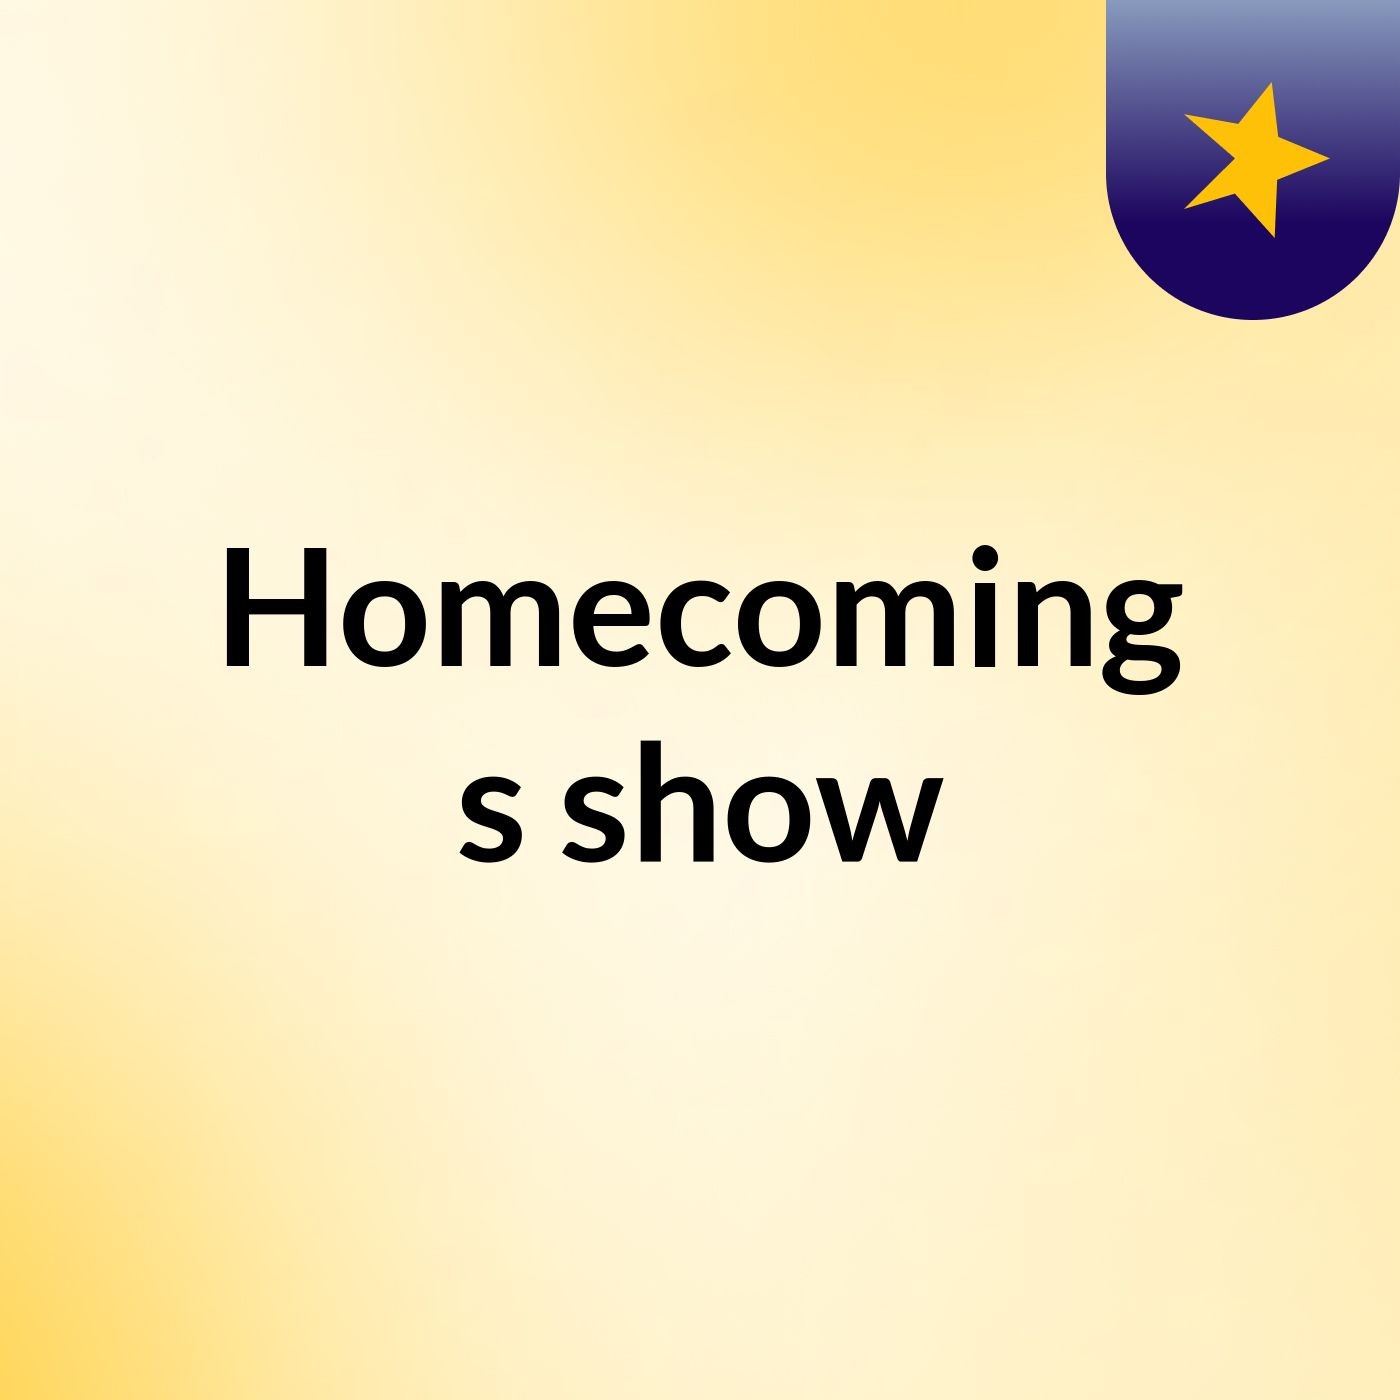 Homecoming's show